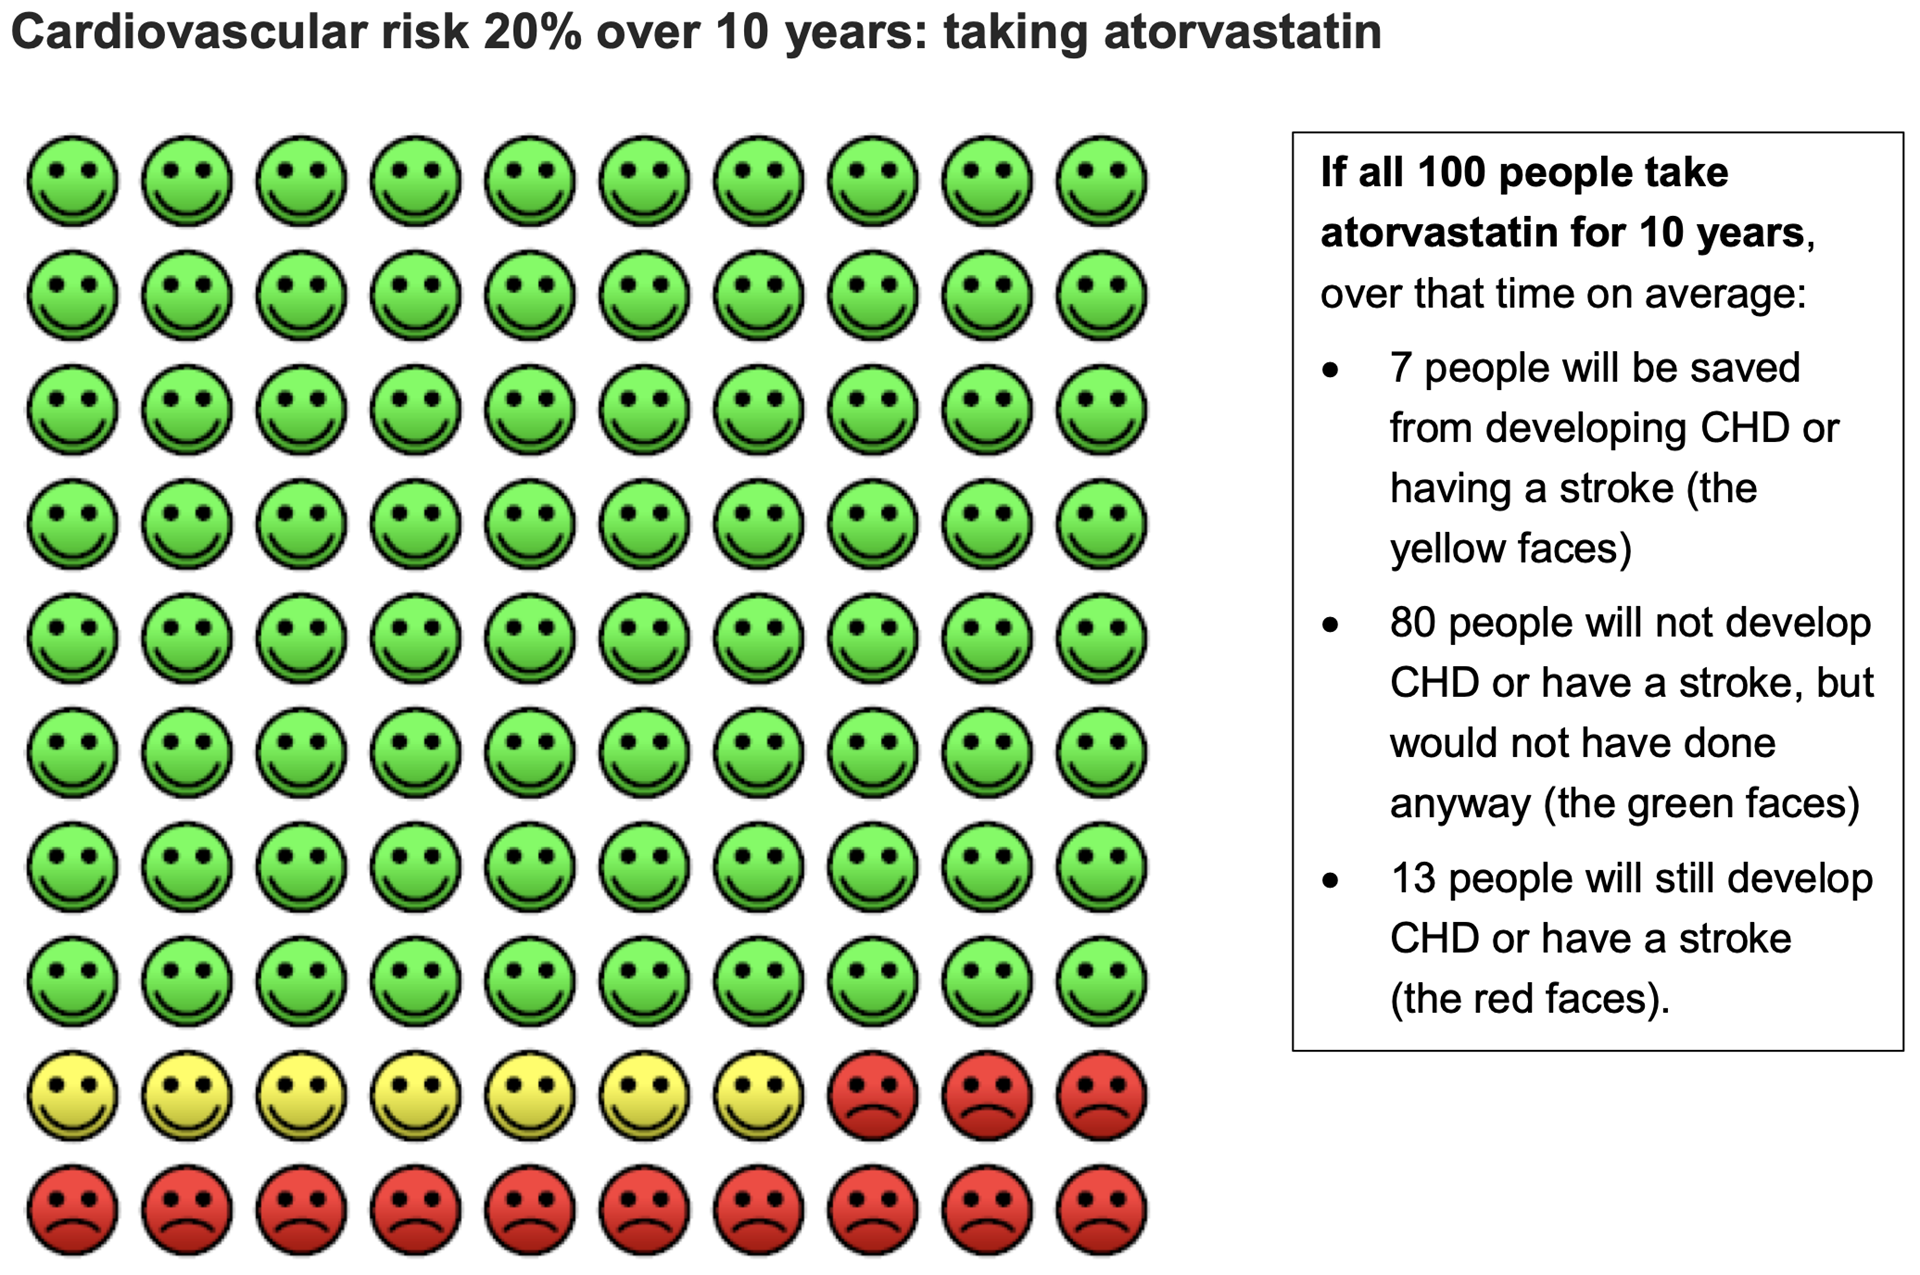 Risk 10% over 10 years: no treatment 